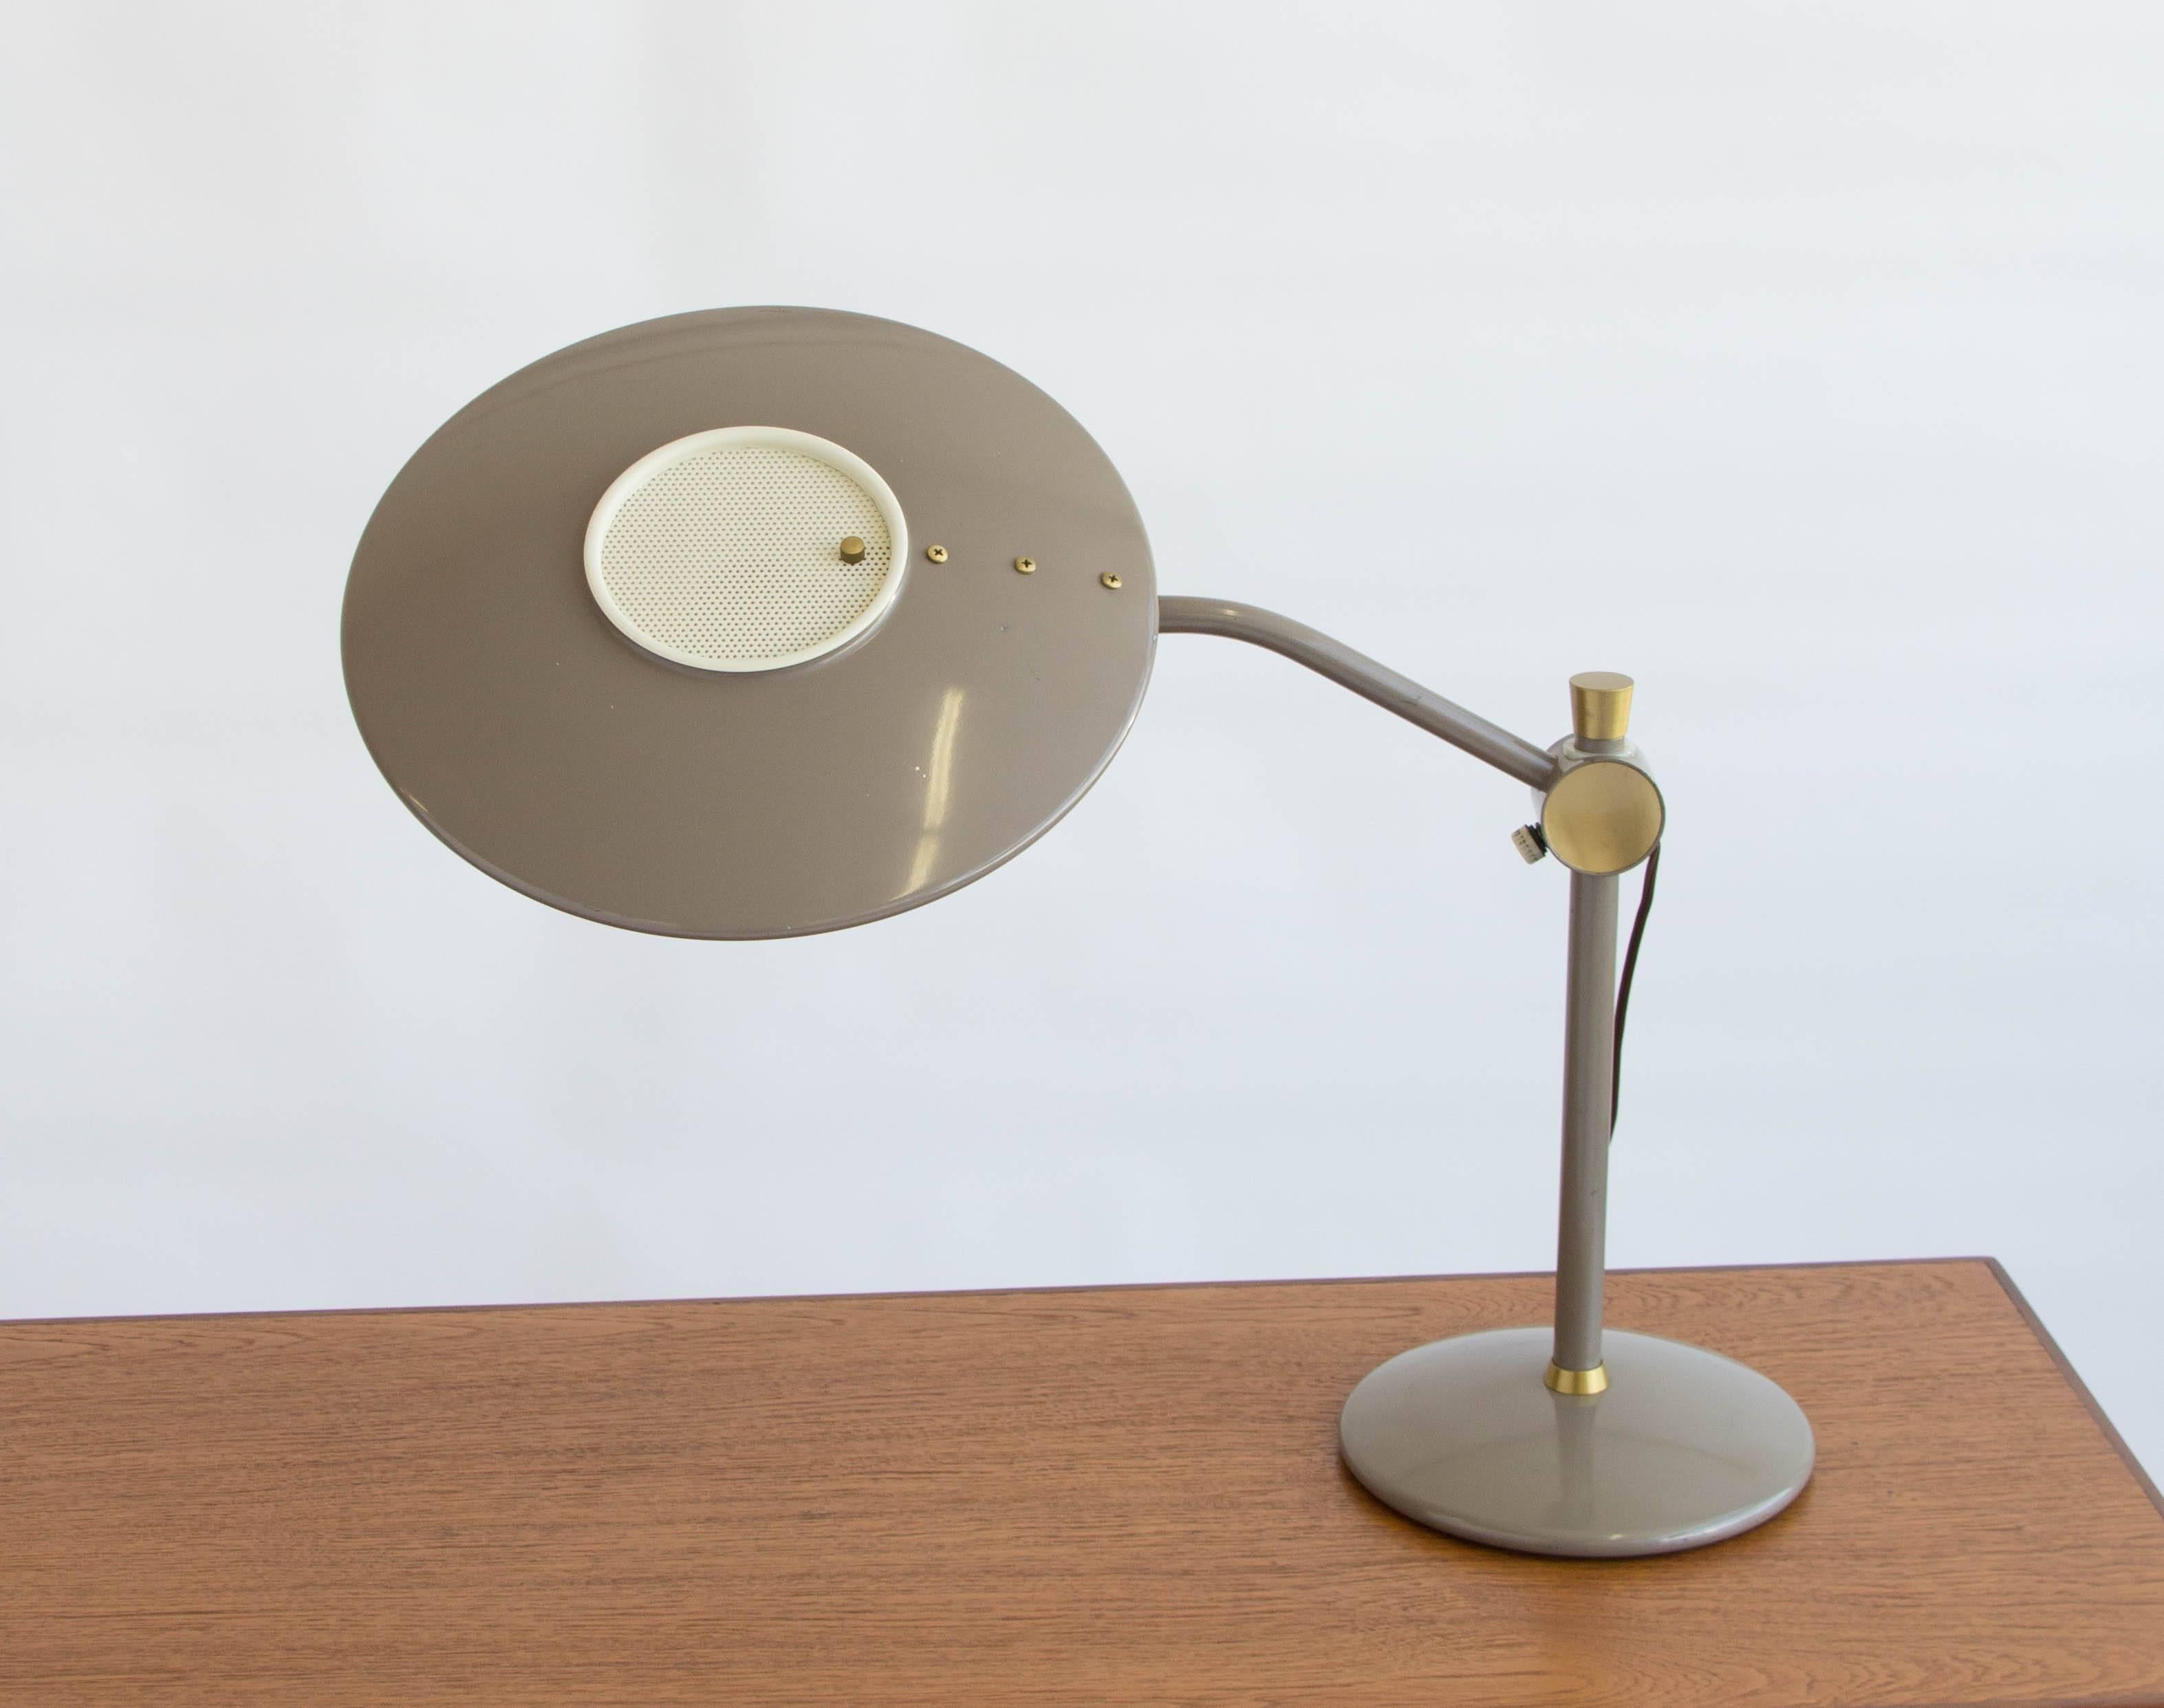 

This Dazor desk lamp model 2008 is a 